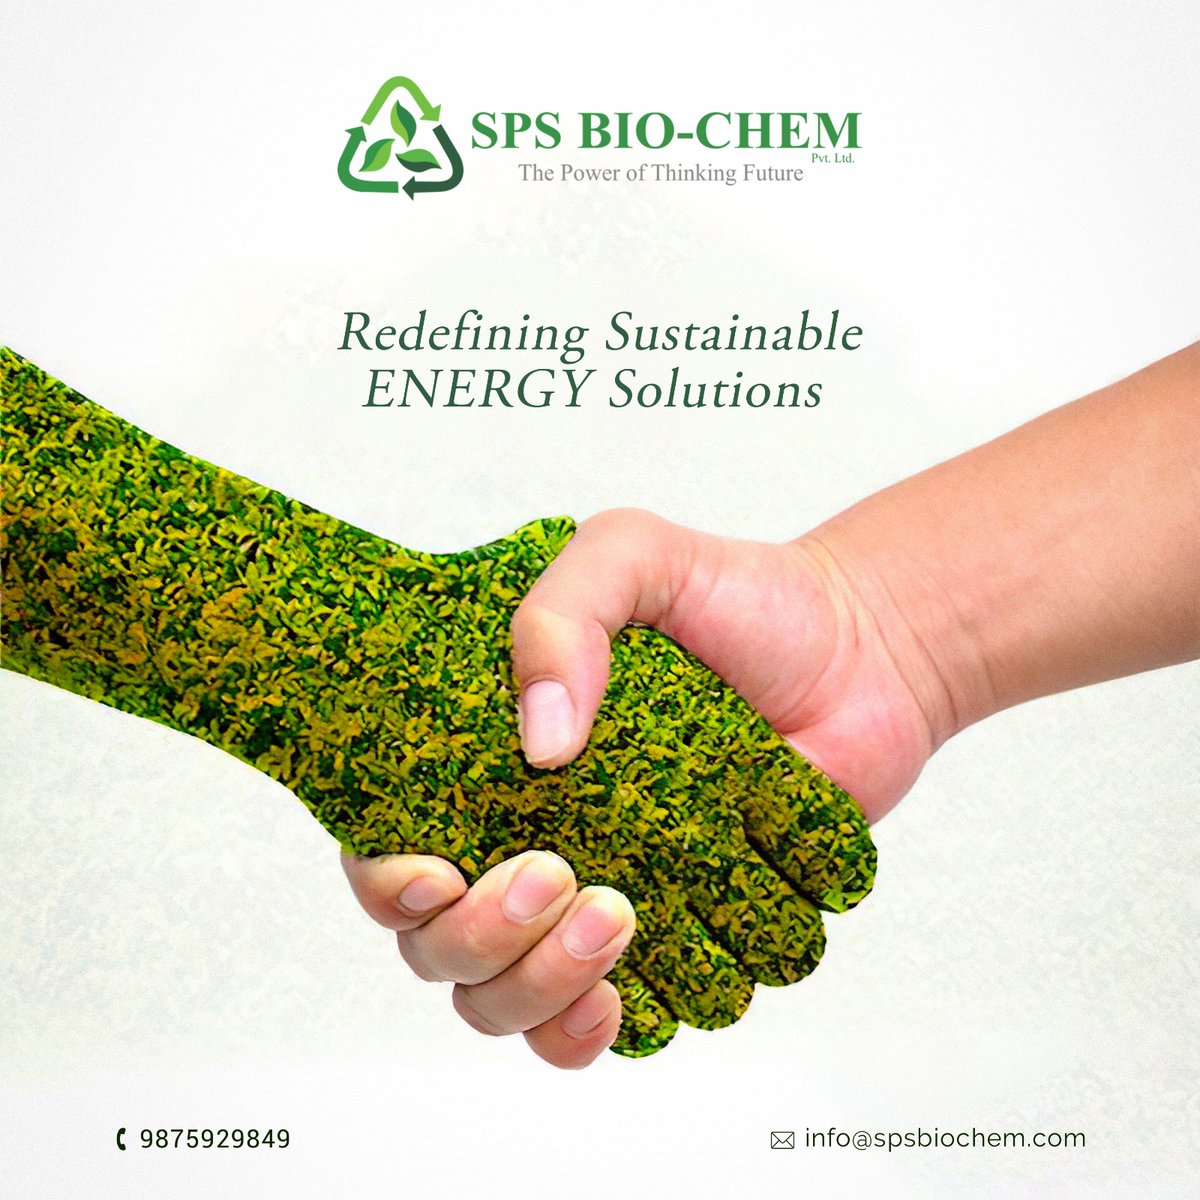 SPS BIO-CHEM is proud to be redefining sustainable energy solutions with our innovative biochemical manufacturing process. #Sustainability #compressedbiogas #fertilizer #manure #organicfarming